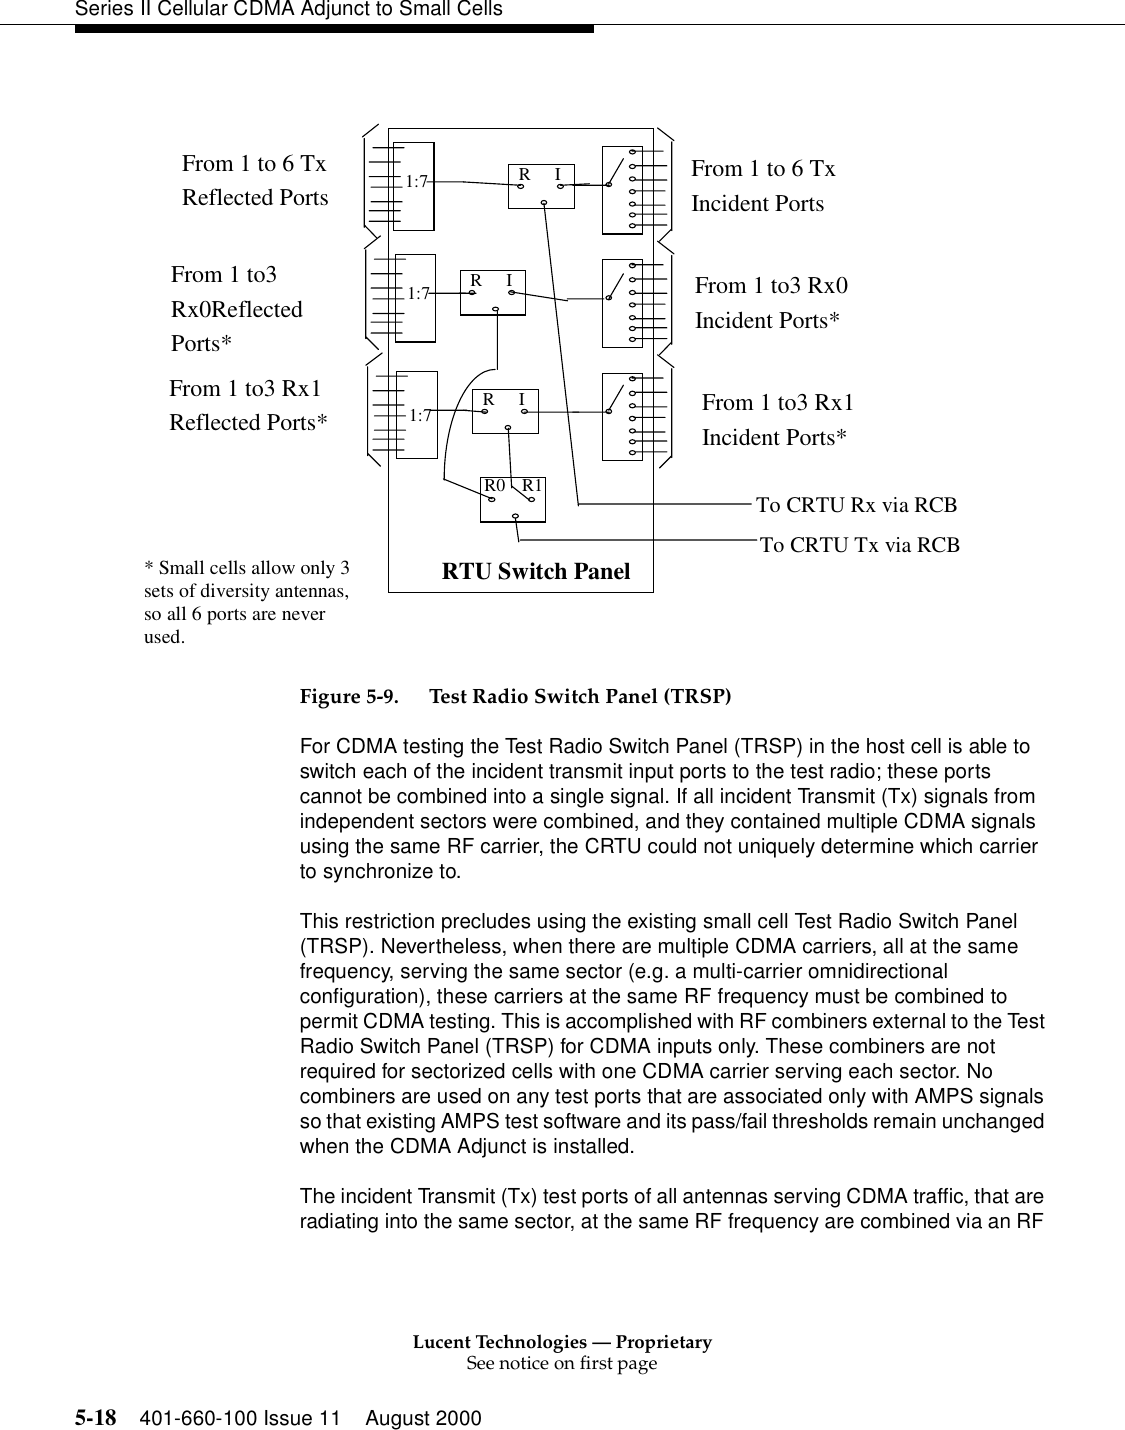 Lucent Technologies — ProprietarySee notice on first page5-18 401-660-100 Issue 11 August 2000Series II Cellular CDMA Adjunct to Small CellsFigure 5-9. Test Radio Switch Panel (TRSP)For CDMA testing the Test Radio Switch Panel (TRSP) in the host cell is able to switch each of the incident transmit input ports to the test radio; these ports cannot be combined into a single signal. If all incident Transmit (Tx) signals from independent sectors were combined, and they contained multiple CDMA signals using the same RF carrier, the CRTU could not uniquely determine which carrier to synchronize to. This restriction precludes using the existing small cell Test Radio Switch Panel (TRSP). Nevertheless, when there are multiple CDMA carriers, all at the same frequency, serving the same sector (e.g. a multi-carrier omnidirectional configuration), these carriers at the same RF frequency must be combined to permit CDMA testing. This is accomplished with RF combiners external to the Test Radio Switch Panel (TRSP) for CDMA inputs only. These combiners are not required for sectorized cells with one CDMA carrier serving each sector. No combiners are used on any test ports that are associated only with AMPS signals so that existing AMPS test software and its pass/fail thresholds remain unchanged when the CDMA Adjunct is installed.The incident Transmit (Tx) test ports of all antennas serving CDMA traffic, that are radiating into the same sector, at the same RF frequency are combined via an RF From 1 to 6 TxIncident PortsFrom 1 to3 Rx0Incident Ports*From 1 to3 Rx1Incident Ports** Small cells allow only 3sets of diversity antennas,so all 6 ports are neverused.From 1 to 6 TxReflected PortsFrom 1 to3Rx0ReflectedPorts*From 1 to3 Rx1Reflected Ports*1:71:71:7RTU Switch PanelRIRIRIR1R0 To CRTU Rx via RCBTo CRTU Tx via RCB